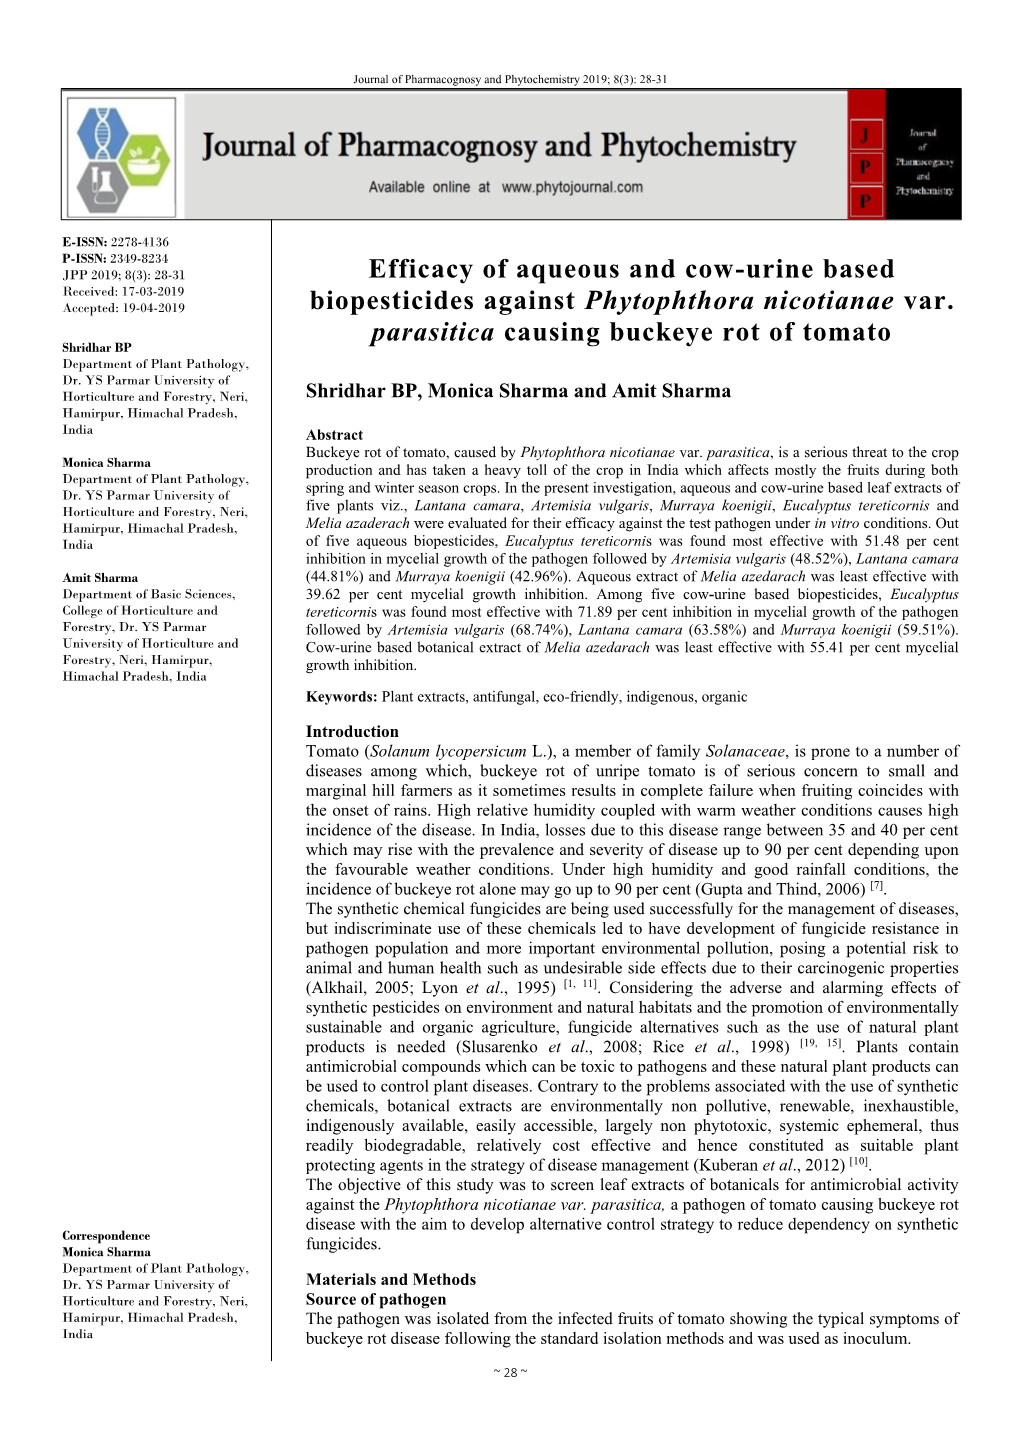 Efficacy of Aqueous and Cow-Urine Based Biopesticides Against